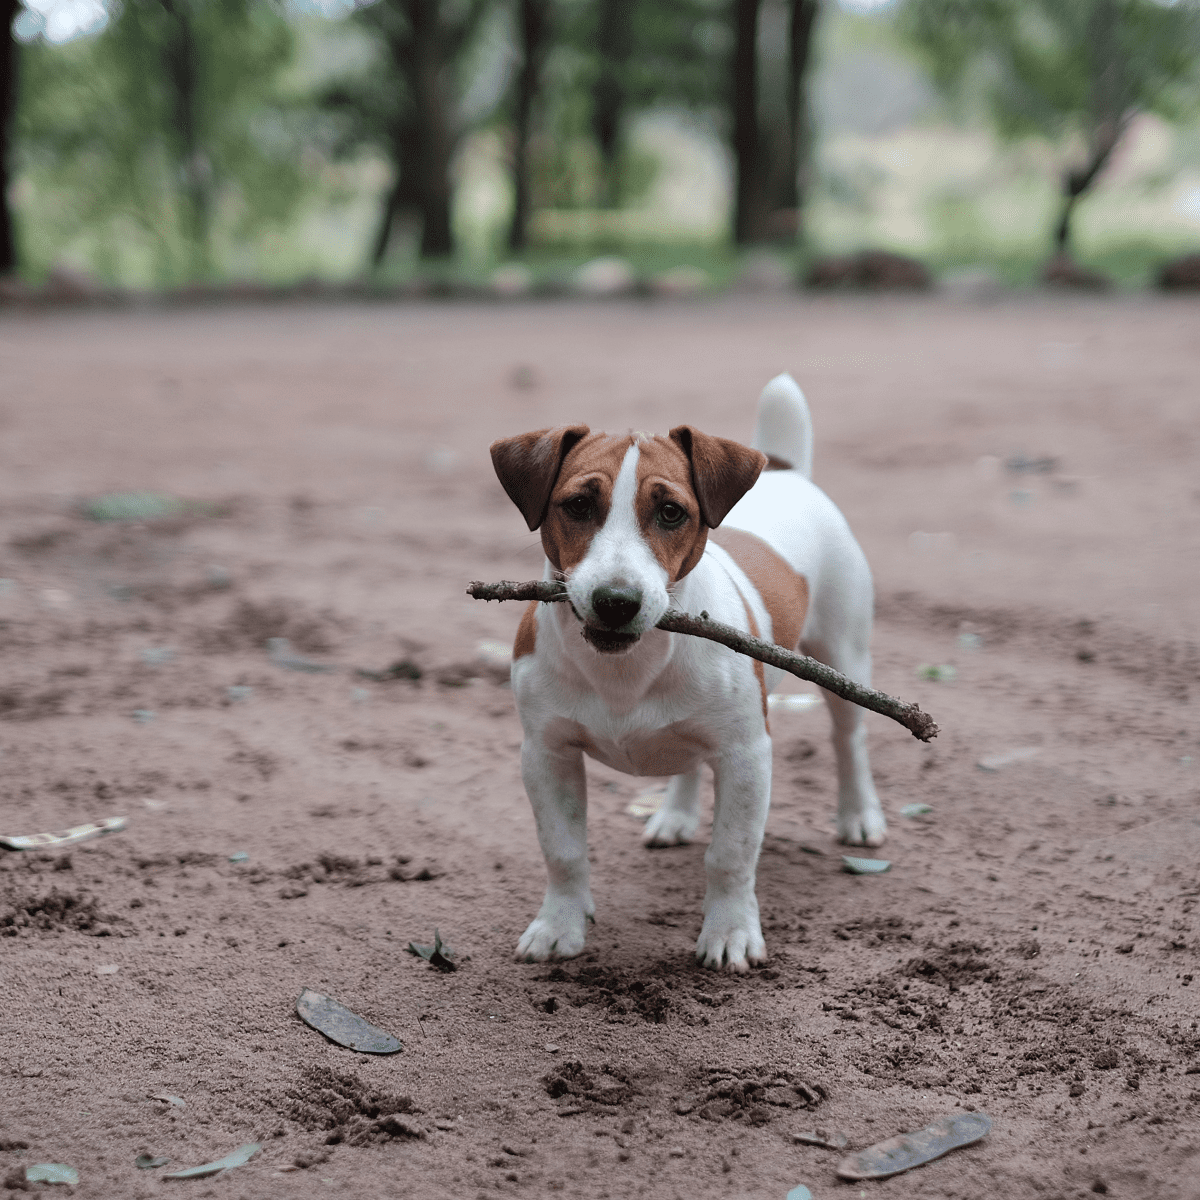 https://images.saymedia-content.com/.image/ar_1:1%2Cc_fill%2Ccs_srgb%2Cq_auto:eco%2Cw_1200/MTk2NjQ5MjU2MzgyMTEzNzU5/common-jack-russell-problem-behaviors-and-what-to-do-about-them.png